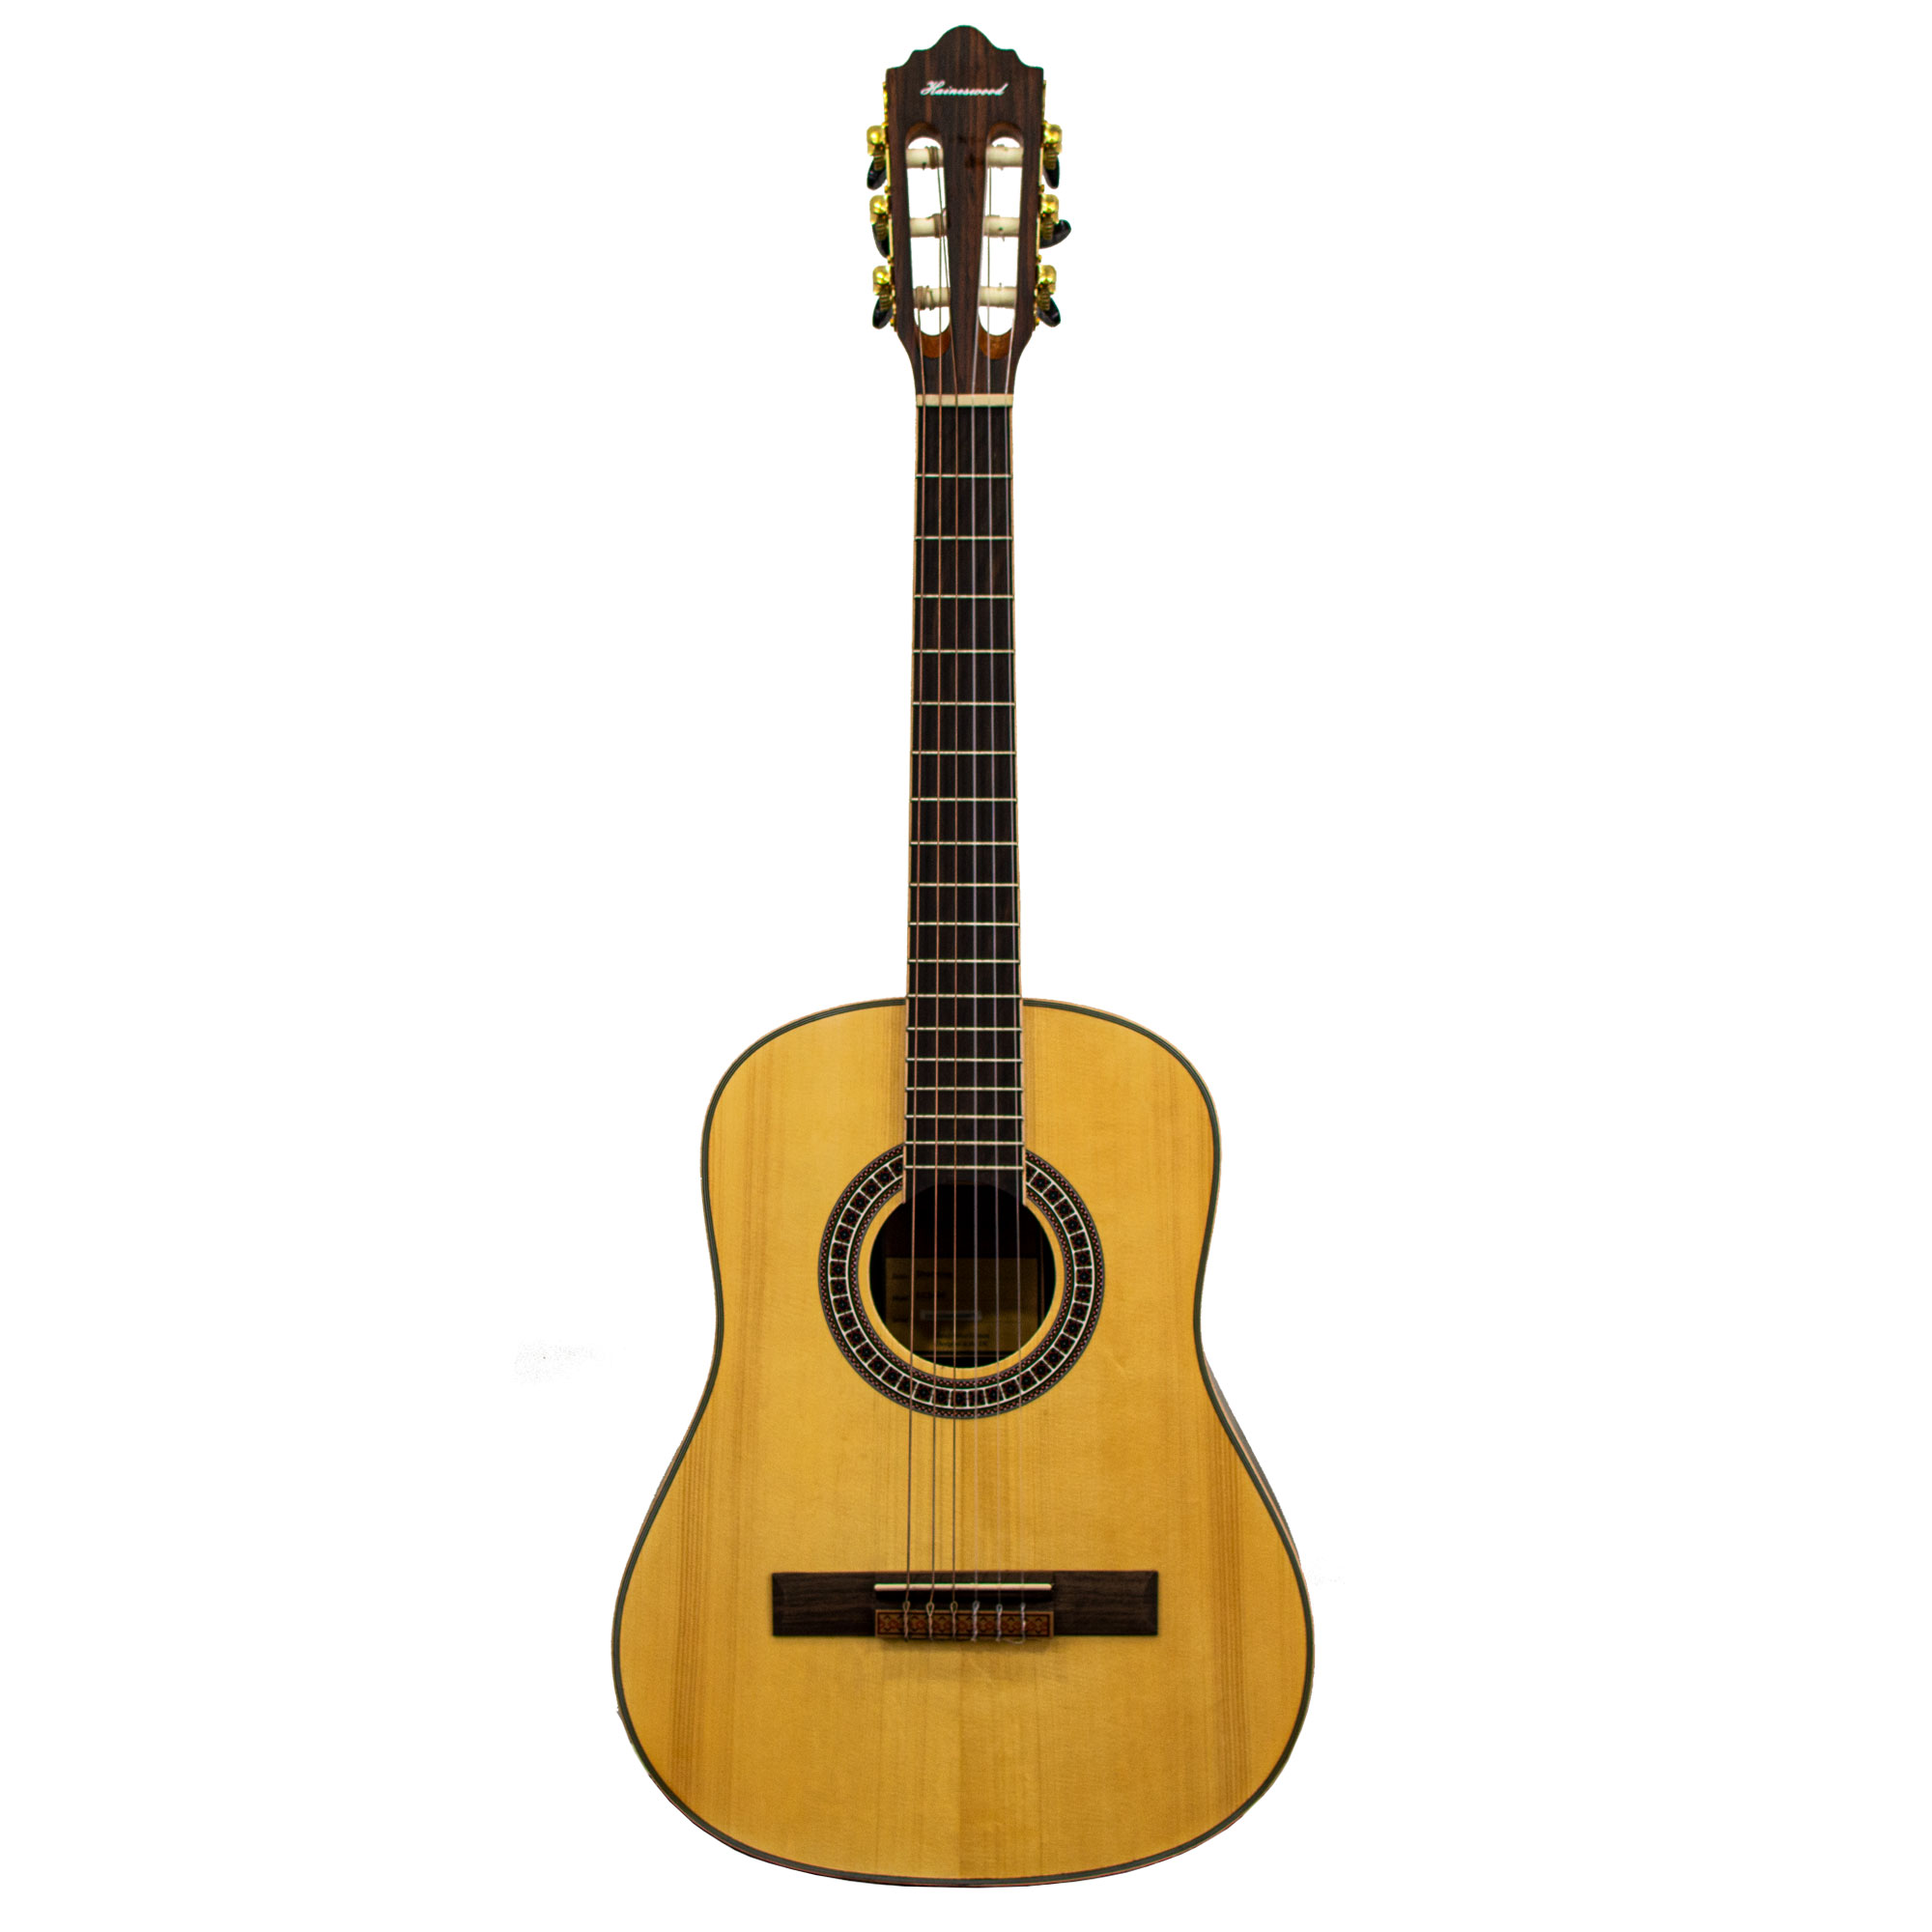 Haineswood HC6034 Classical Guitar (3/4 Size)